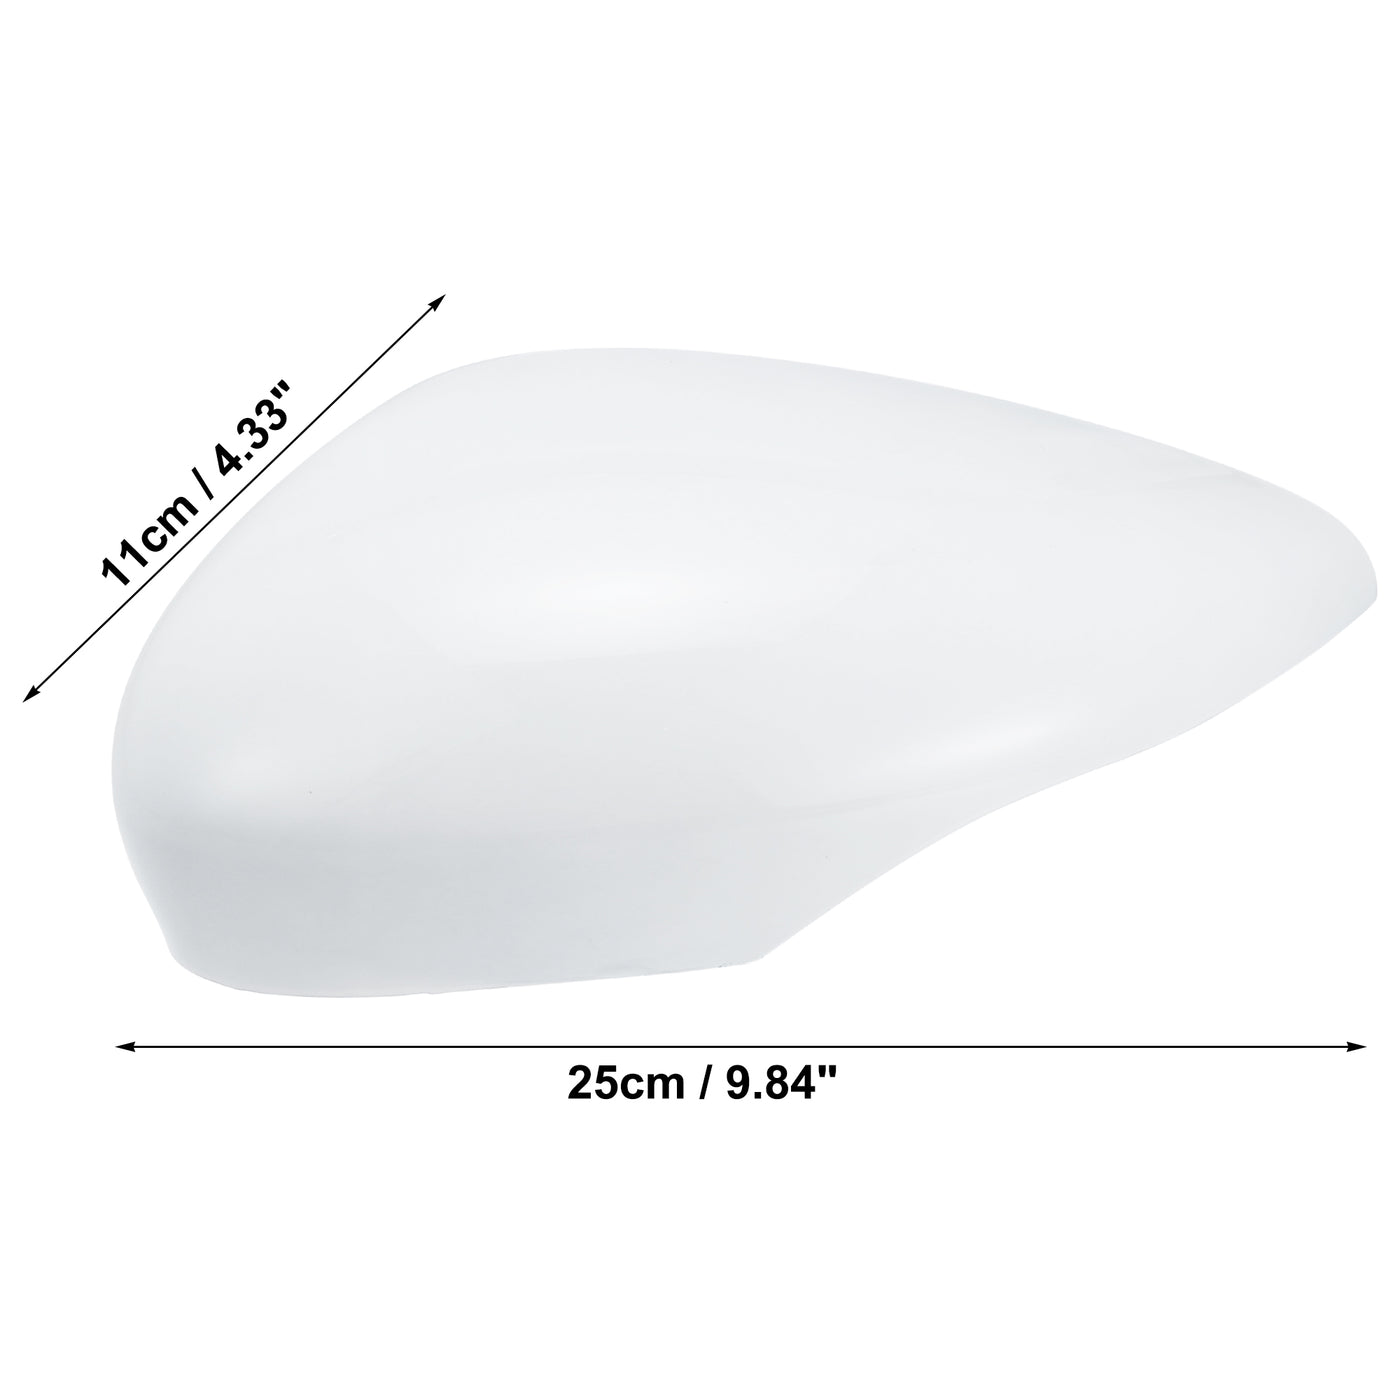 X AUTOHAUX White Left Side Car Side Door Wing Mirror Cover Rear View Mirror Cap for Ford Fiesta MK7 2008 2009 2010 2011 2012 2013 2014 2015 2016 2017